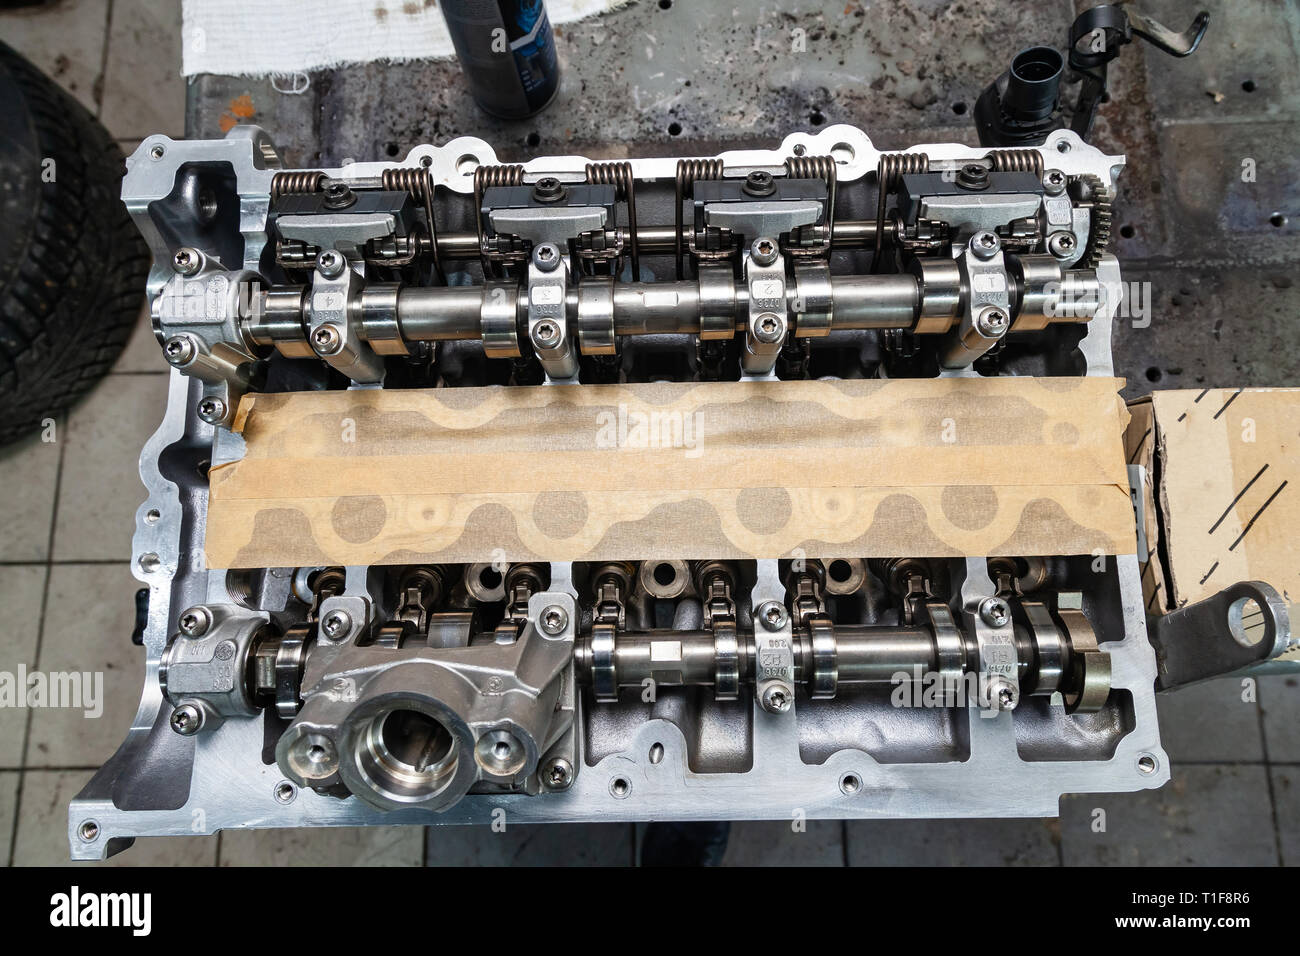 A four-cylinder engine with new camshaft dissembled and removed from car on a workbench in a vehicle repair workshop. Auto service industry. Stock Photo